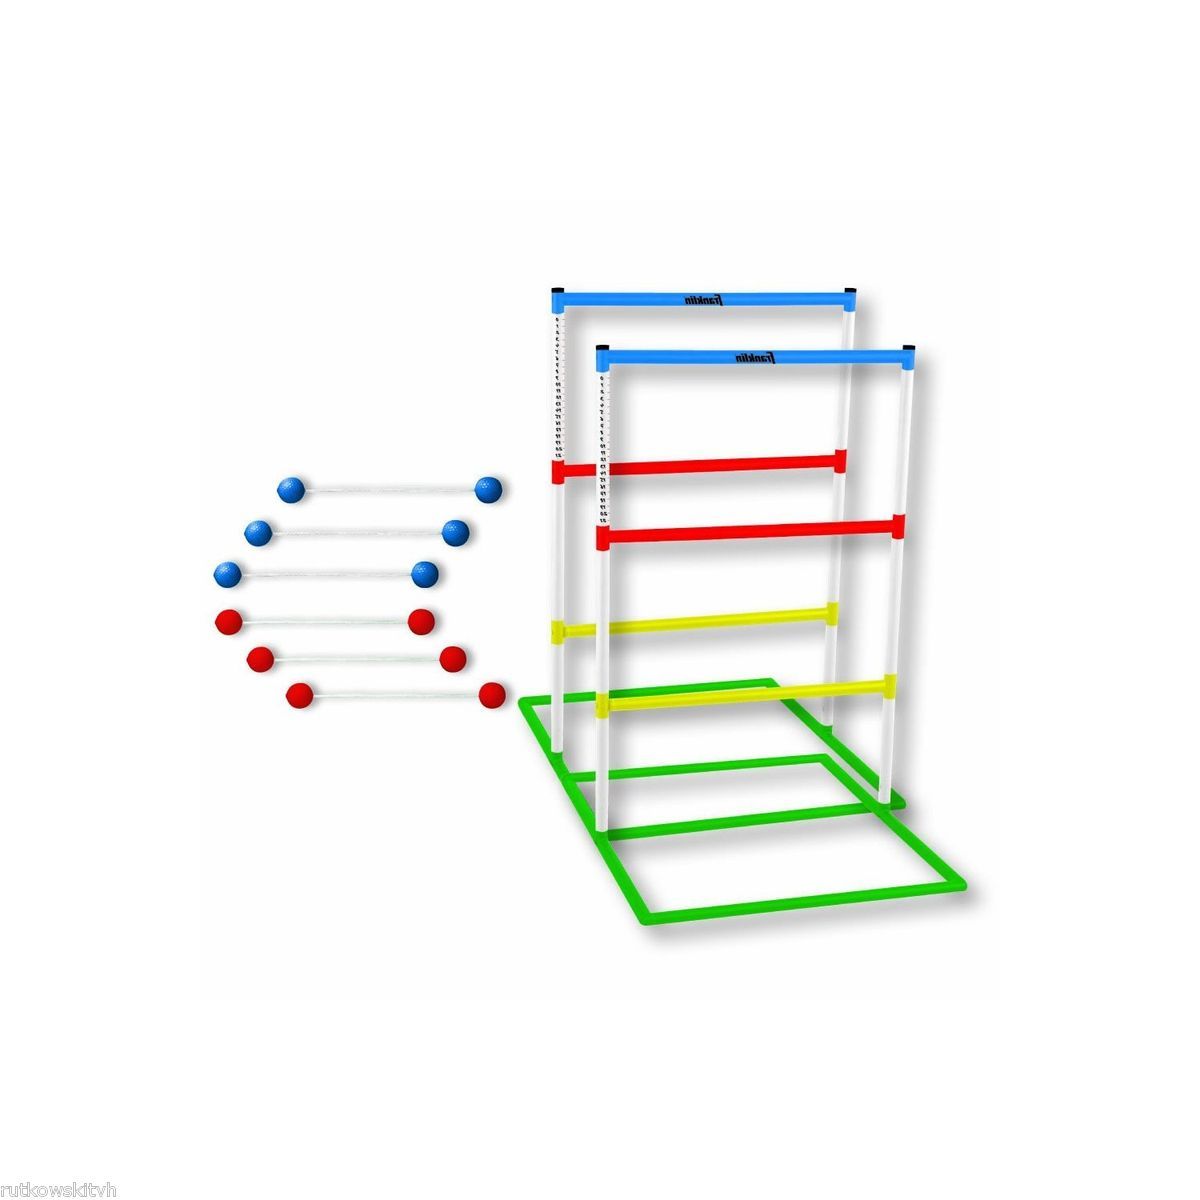 Franklin Sports Outdoor Fun Ladder Golf Toss Game with Carry Storage